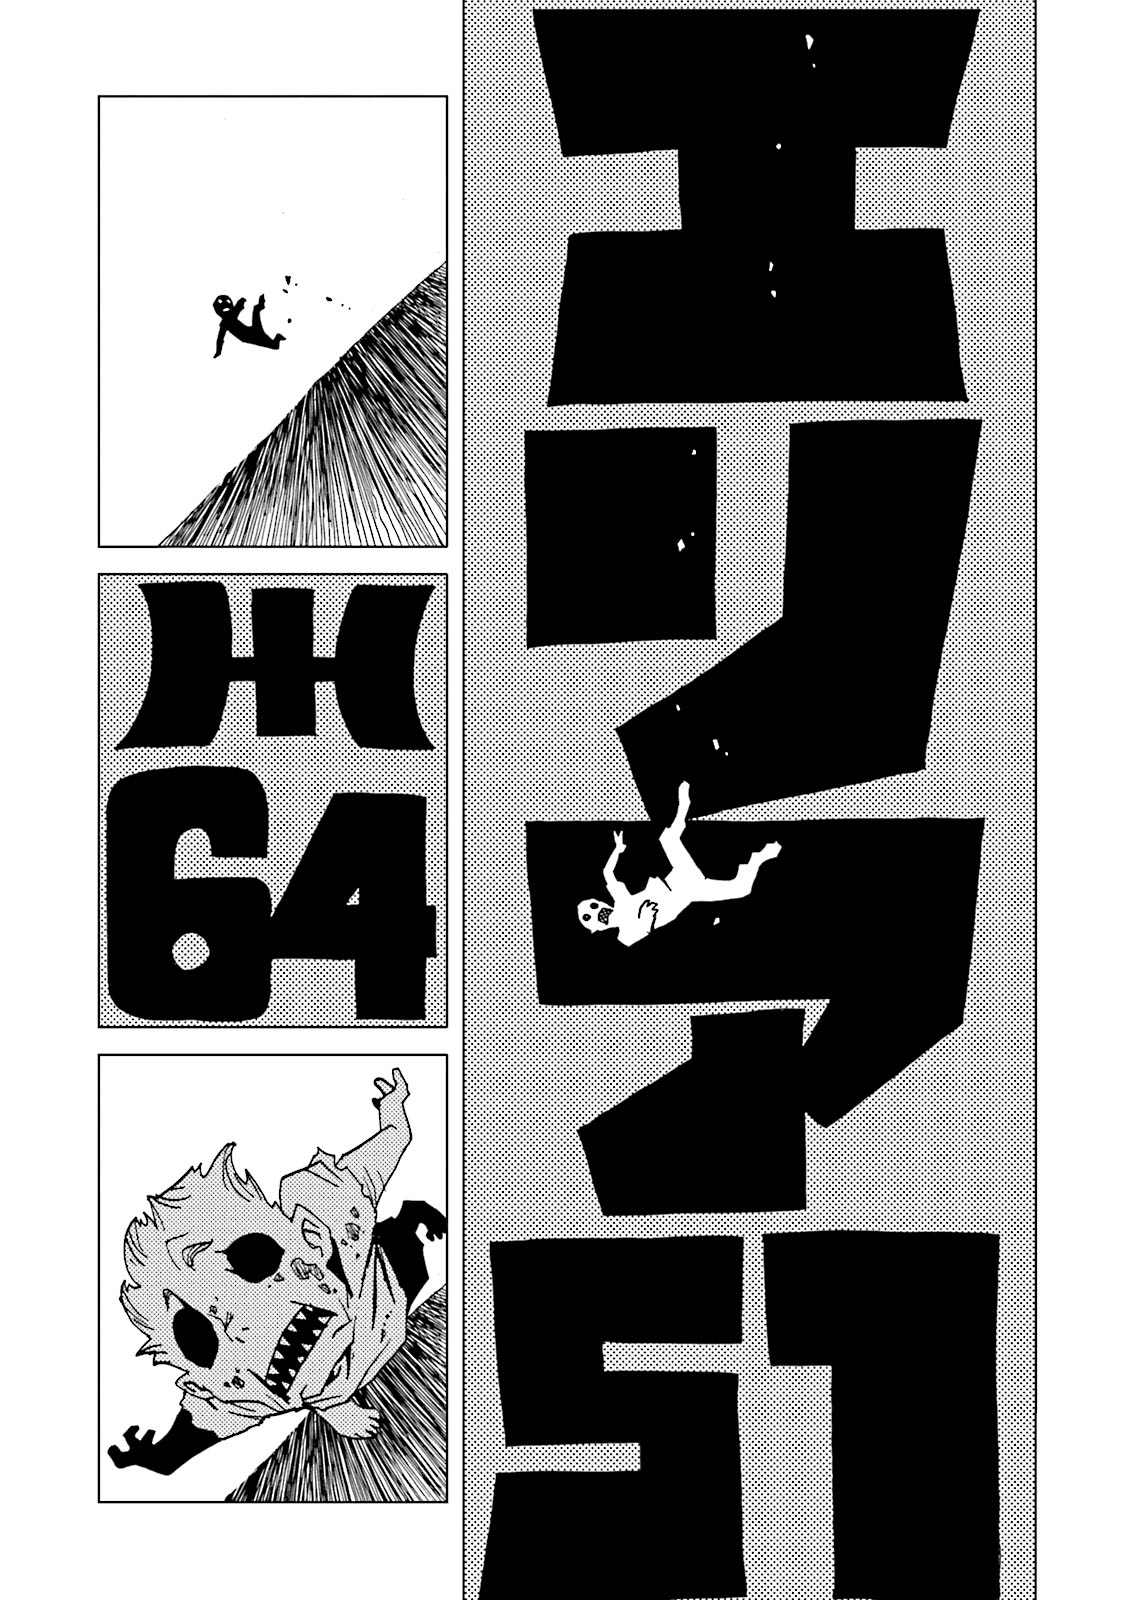 AREA51 - 第64話 - 5